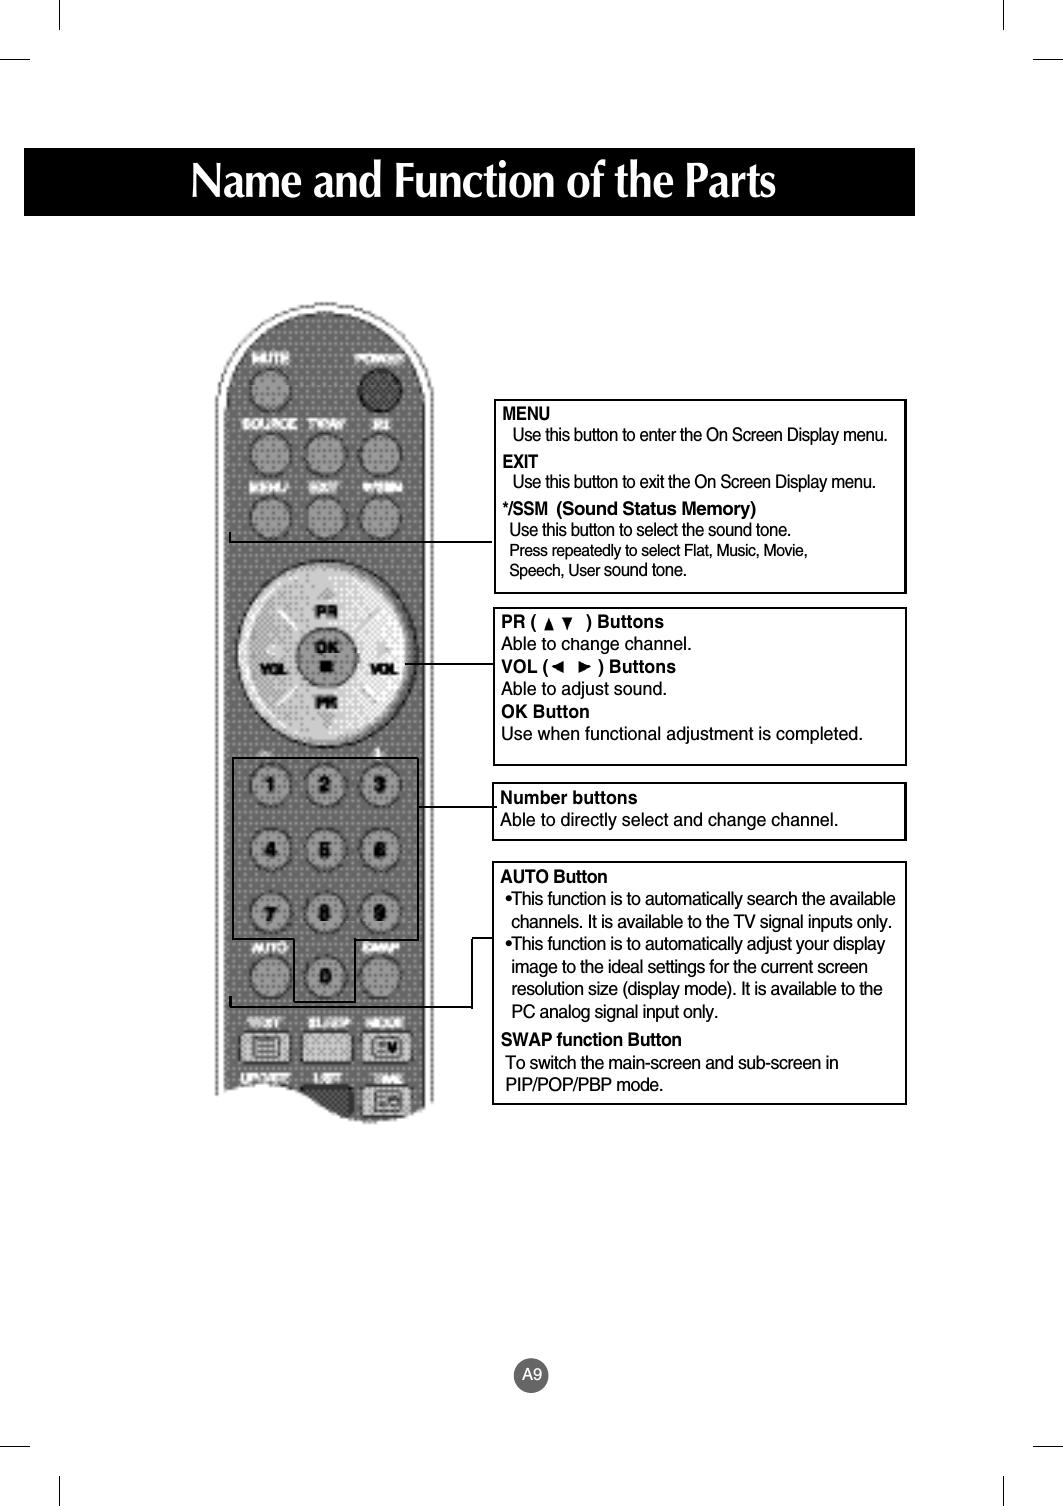 A9Name and Function of the PartsPR (          ) ButtonsAble to change channel.VOL (          ) Buttons Able to adjust sound.OK ButtonUse when functional adjustment is completed.AUTO Button•This function is to automatically search the availablechannels. It is available to the TV signal inputs only. •This function is to automatically adjust your displayimage to the ideal settings for the current screenresolution size (display mode). It is available to thePC analog signal input only.SWAP function ButtonTo switch the main-screen and sub-screen inPIP/POP/PBP mode.Number buttonsAble to directly select and change channel.MENUUse this button to enter the On Screen Display menu.EXITUse this button to exit the On Screen Display menu.*/SSM  (Sound Status Memory)  Use this button to select the sound tone. Press repeatedly to select Flat, Music, Movie, Speech, User sound tone.